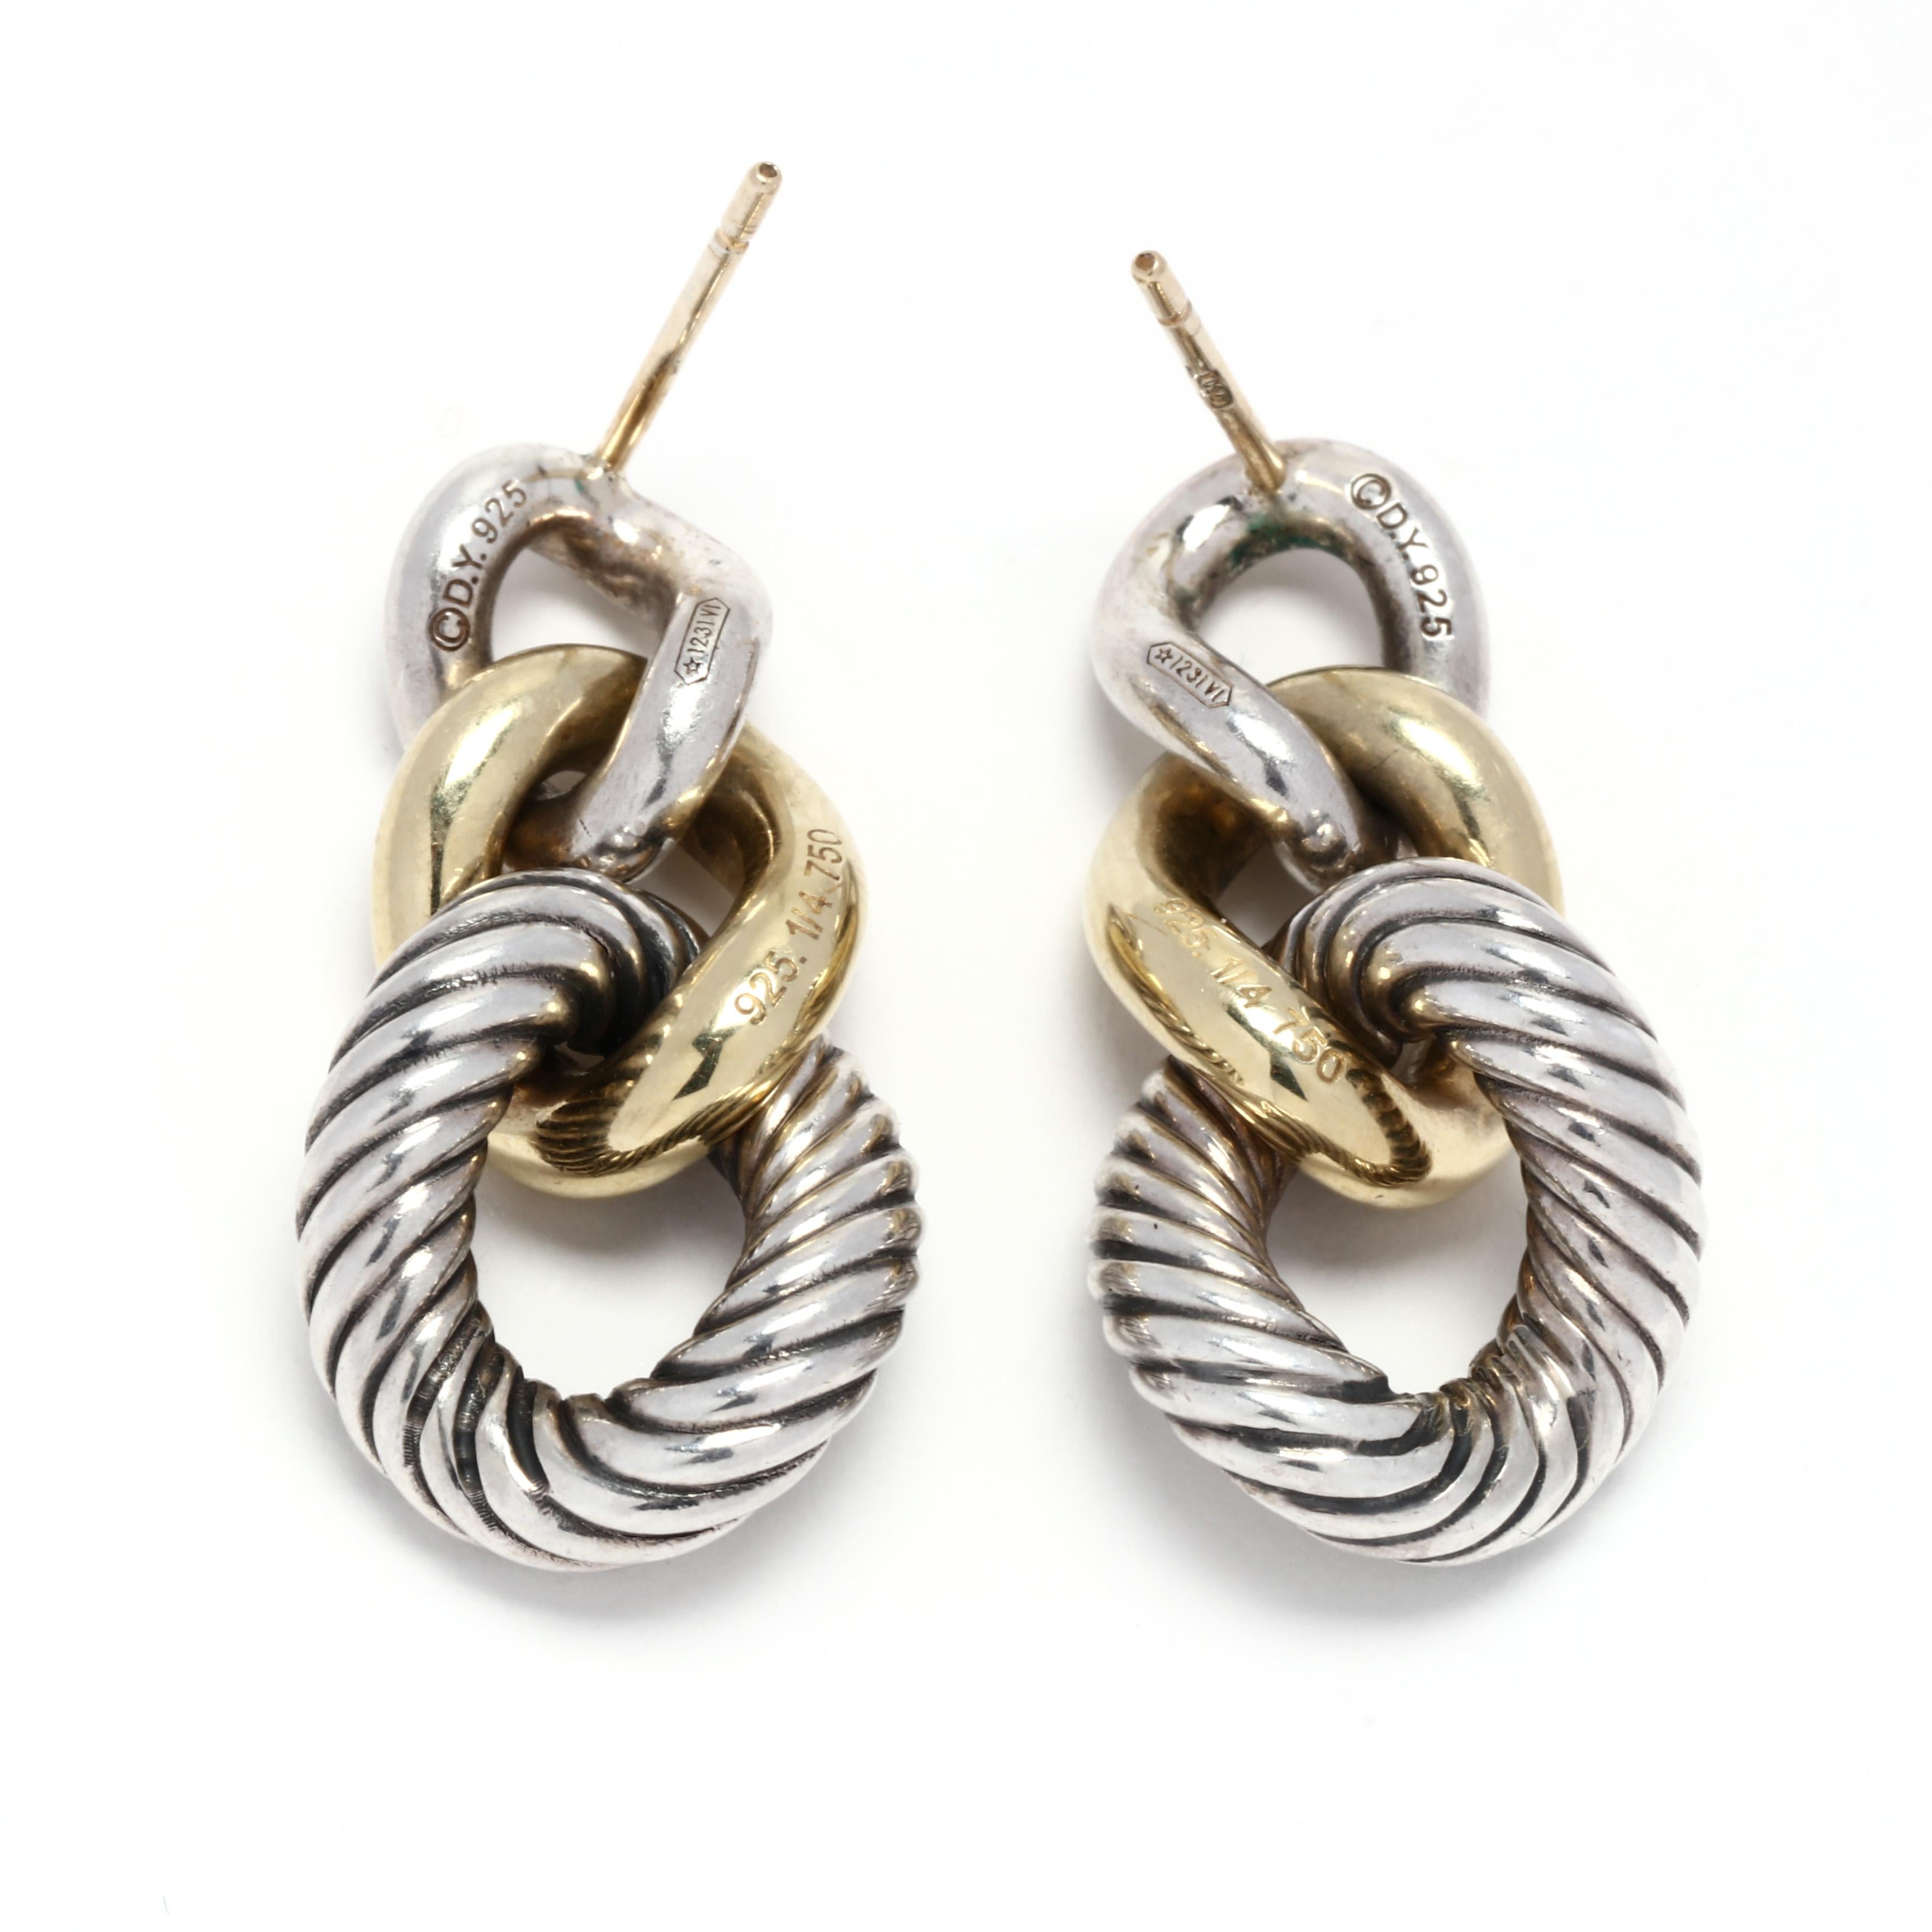 A pair of David Yurman 14 karat yellow gold and sterling silver curb link dangle earrings. From the Belmont collection, a pair of tapered curb link earrings with a polished silver link, a polished gold link and a cable motif silver link with post